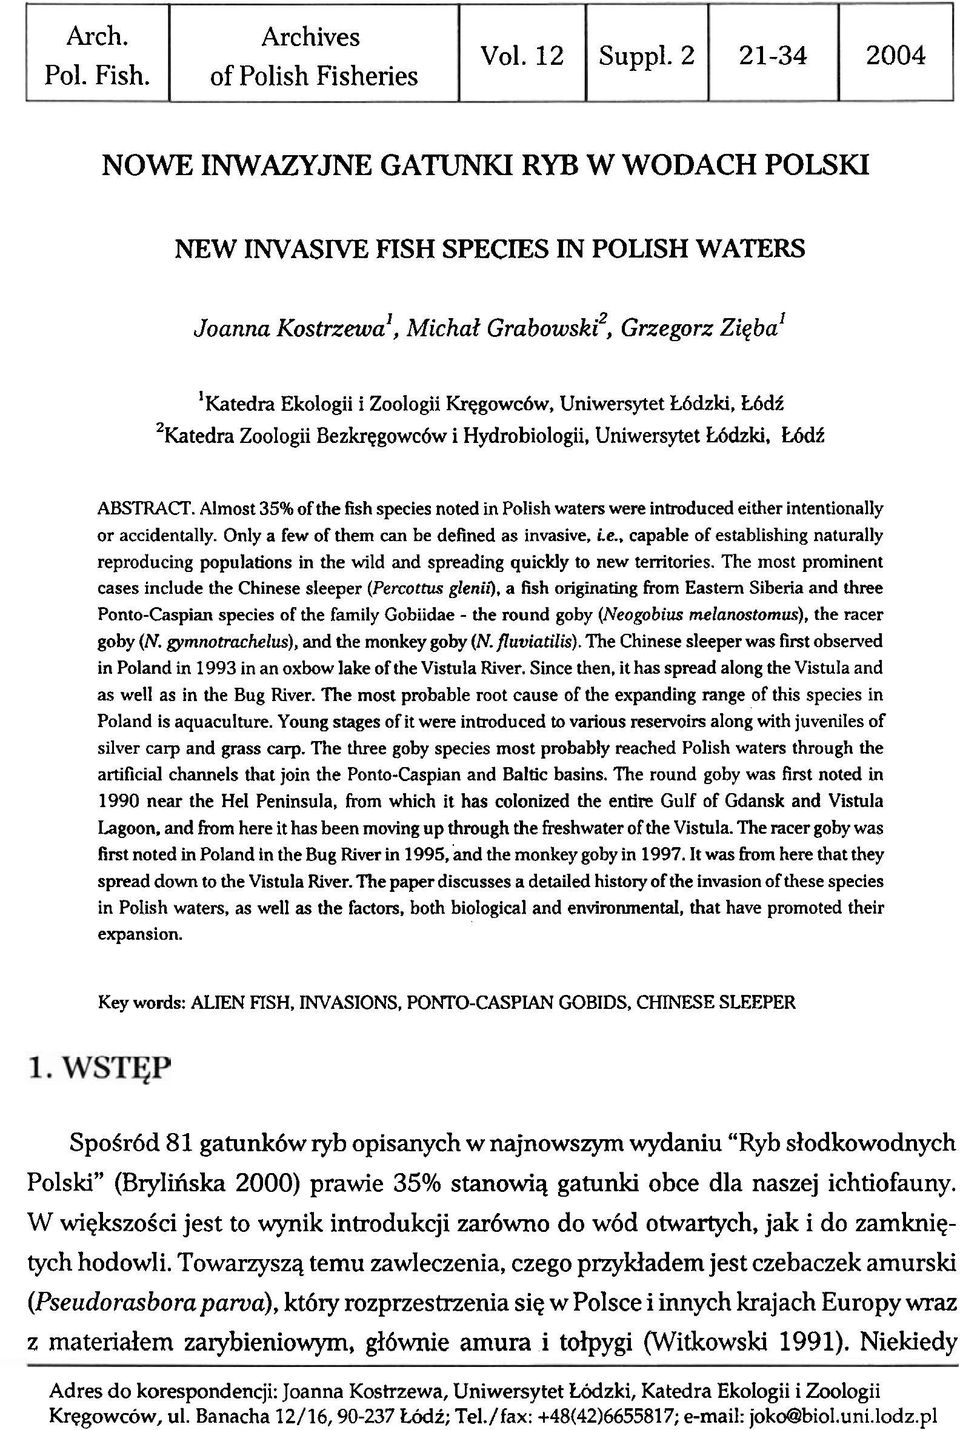 Uniwersytet Mdzki, Udf ABSTRACT. Almost 35% of the fish species noted in Polish waters were introduced either intentionally or accidentally. Only a few of them can be defined as invasive, Le.